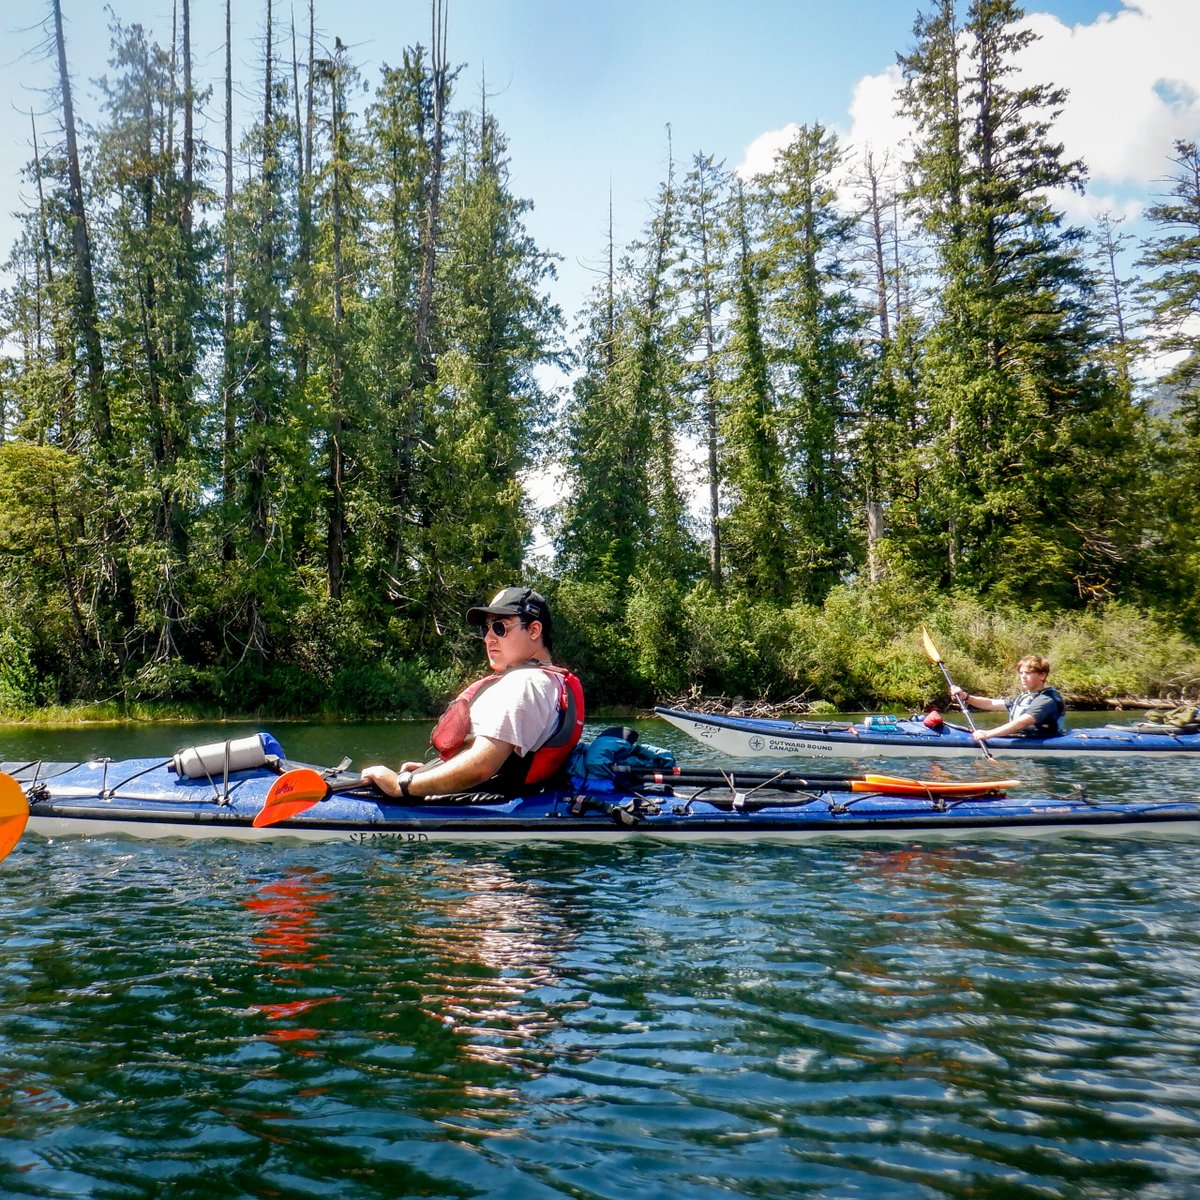 Youth across the country are having life-changing outdoor experiences with Outward Bound Canada. explore-mag.com/outward-bound-…